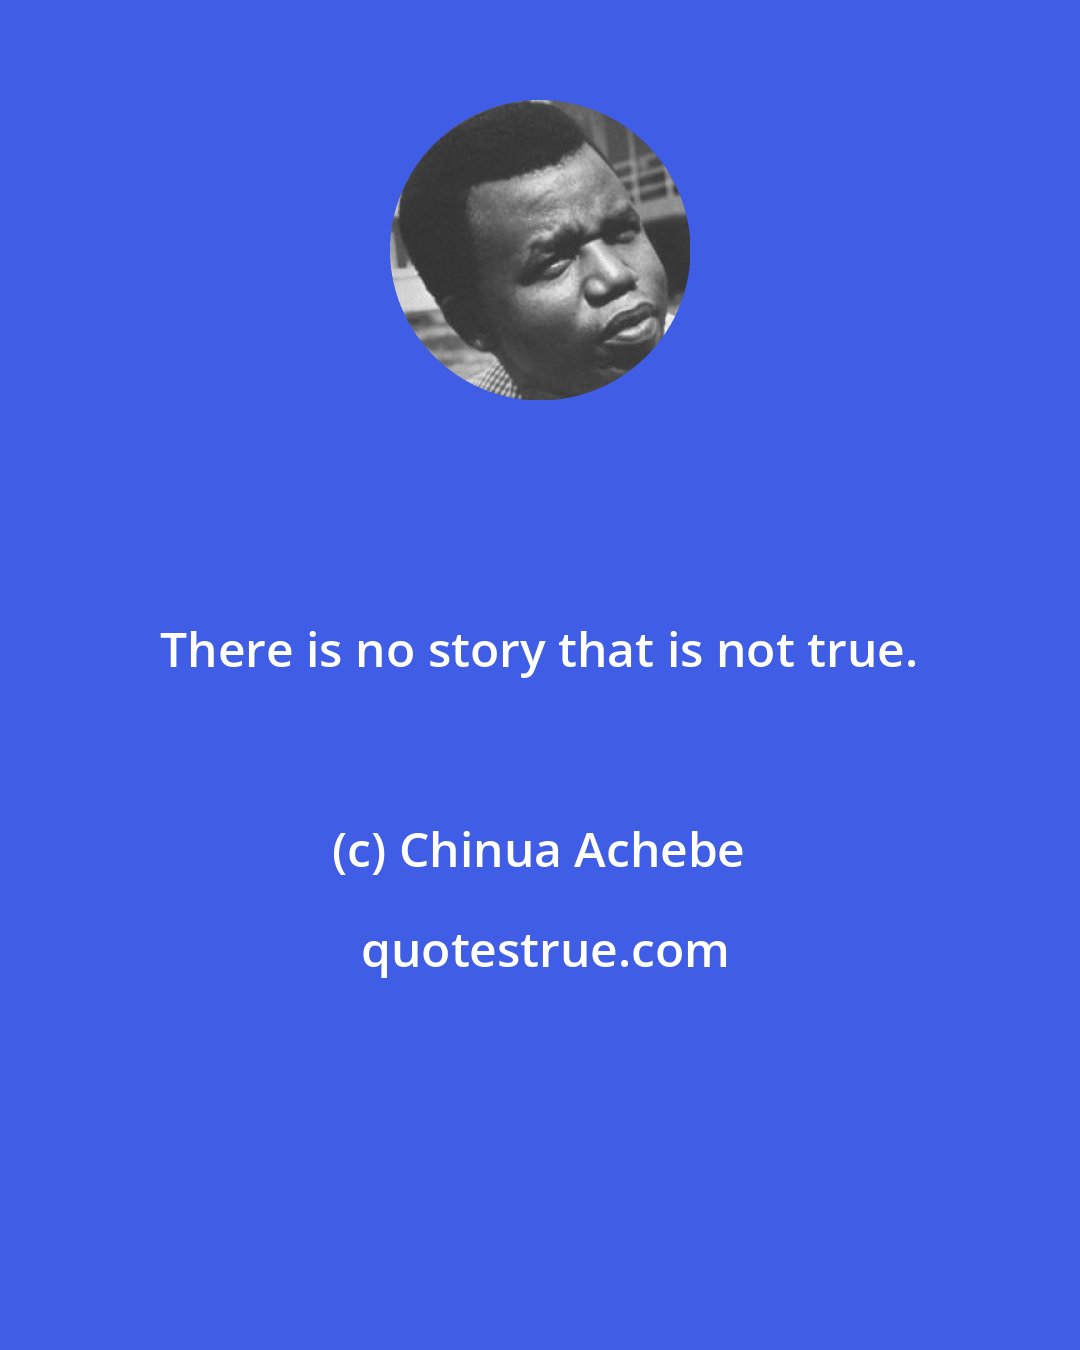 Chinua Achebe: There is no story that is not true.